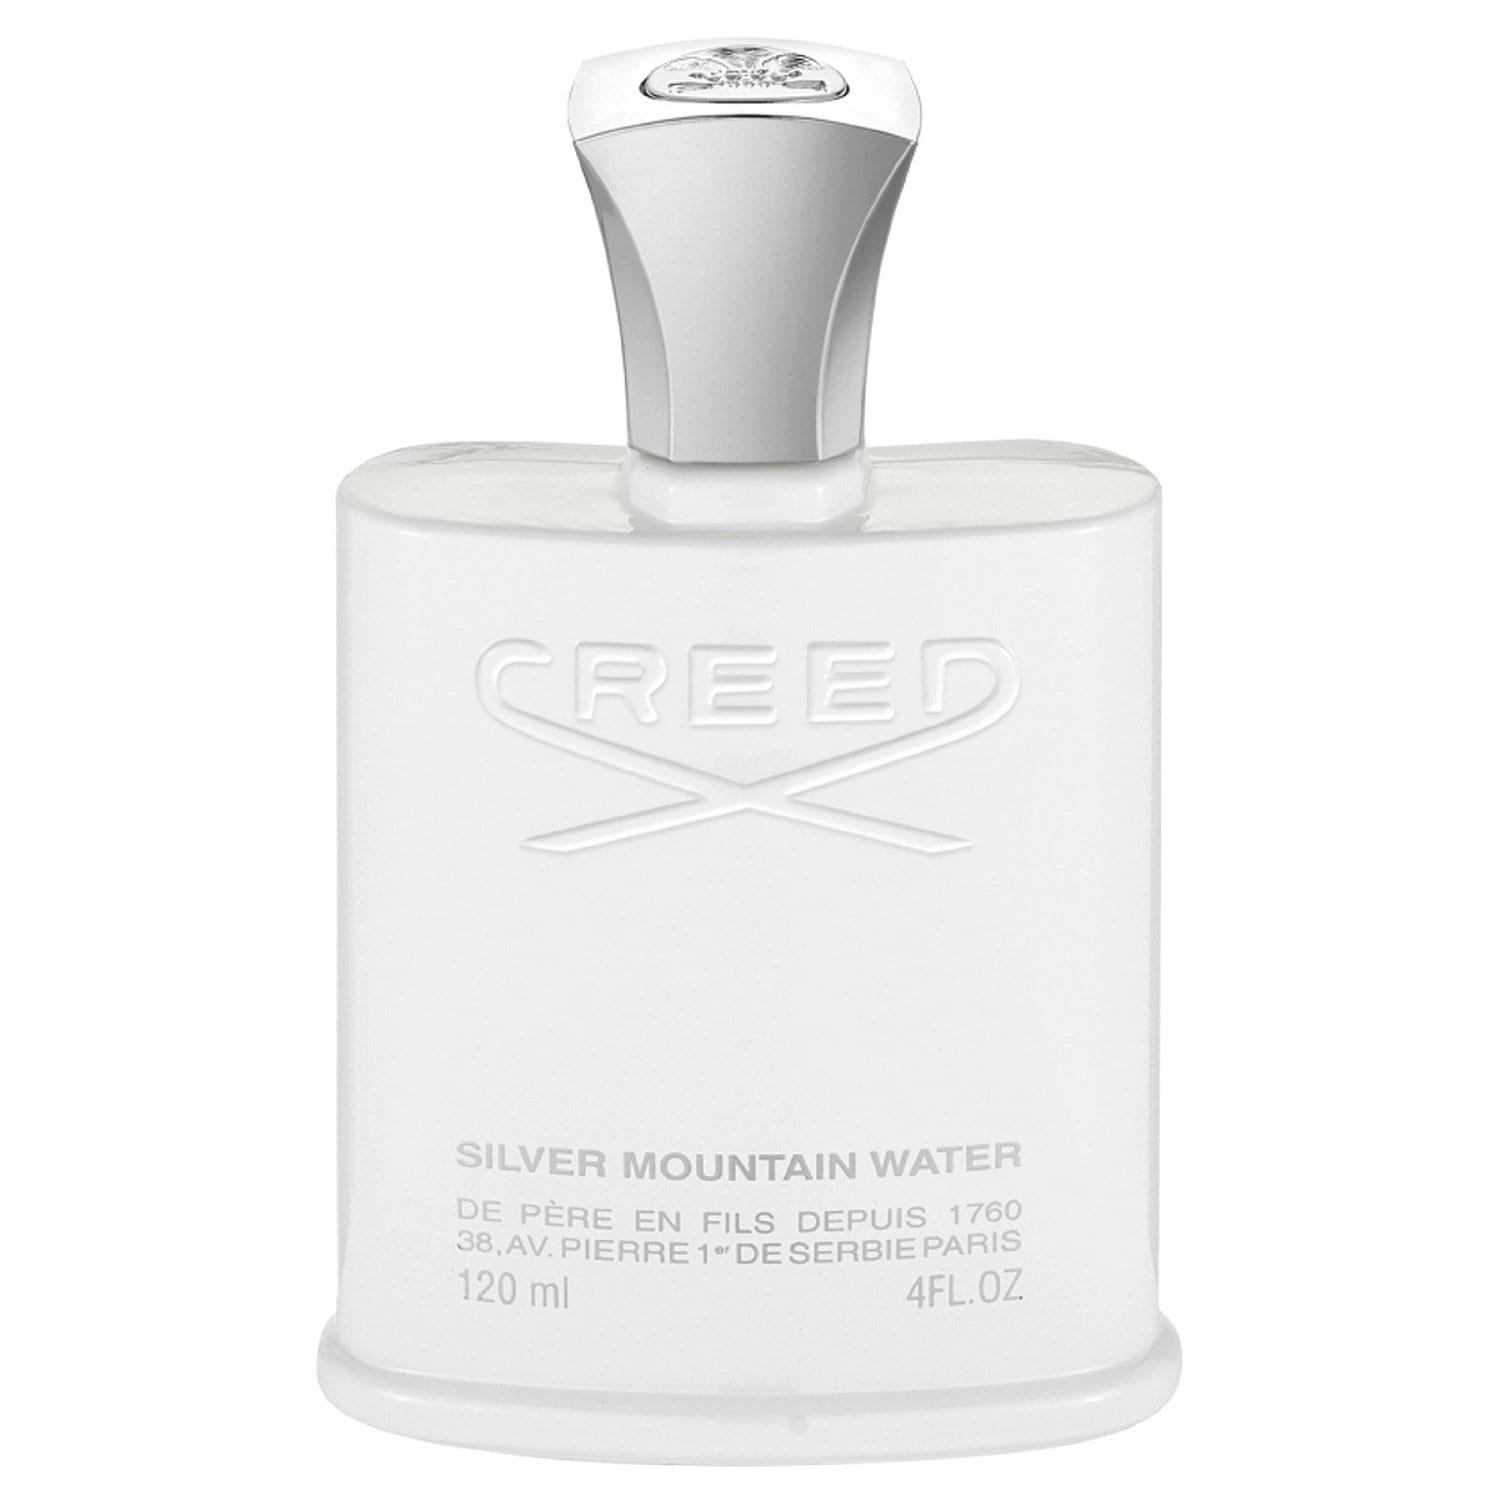 Creed парфюмерная вода silver mountain. Silver Mountain (Creed) 100мл. Creed Silver Mountain Water 100 ml. Creed Silver Mountain Water 120ml. Creed Silver Mountain Water EDP 100ml Tester.